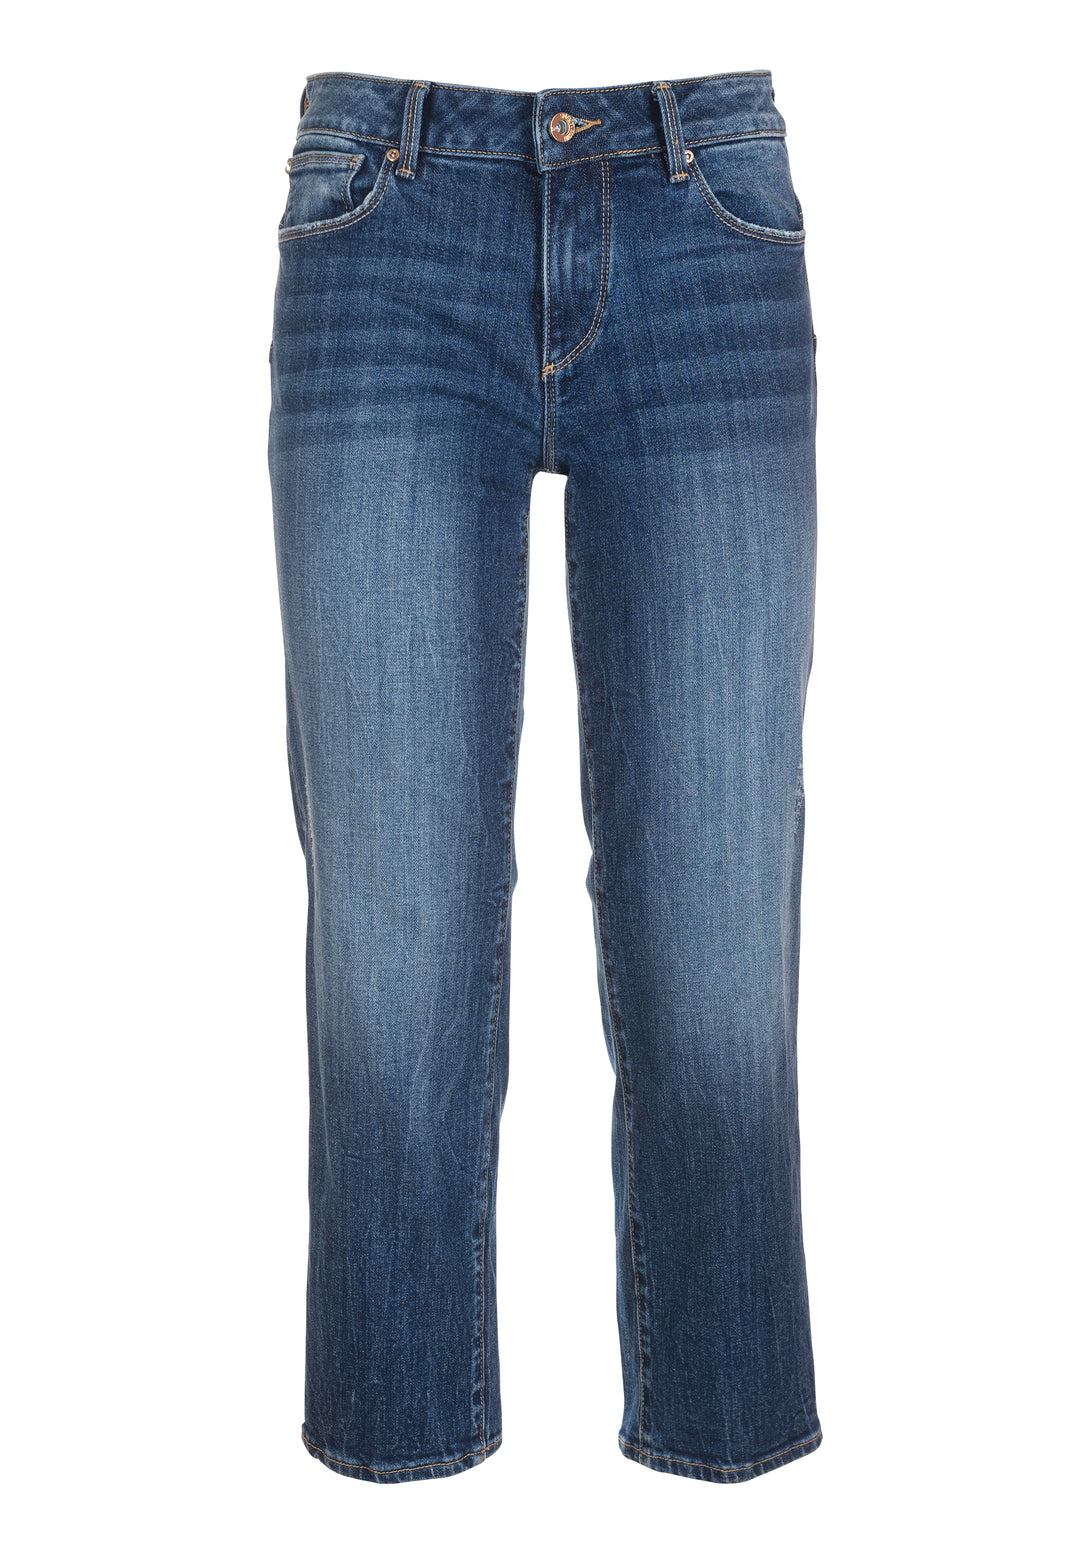 Jeans cropped made in denim with middle wash Fracomina FP23SV8010D40102-349-1